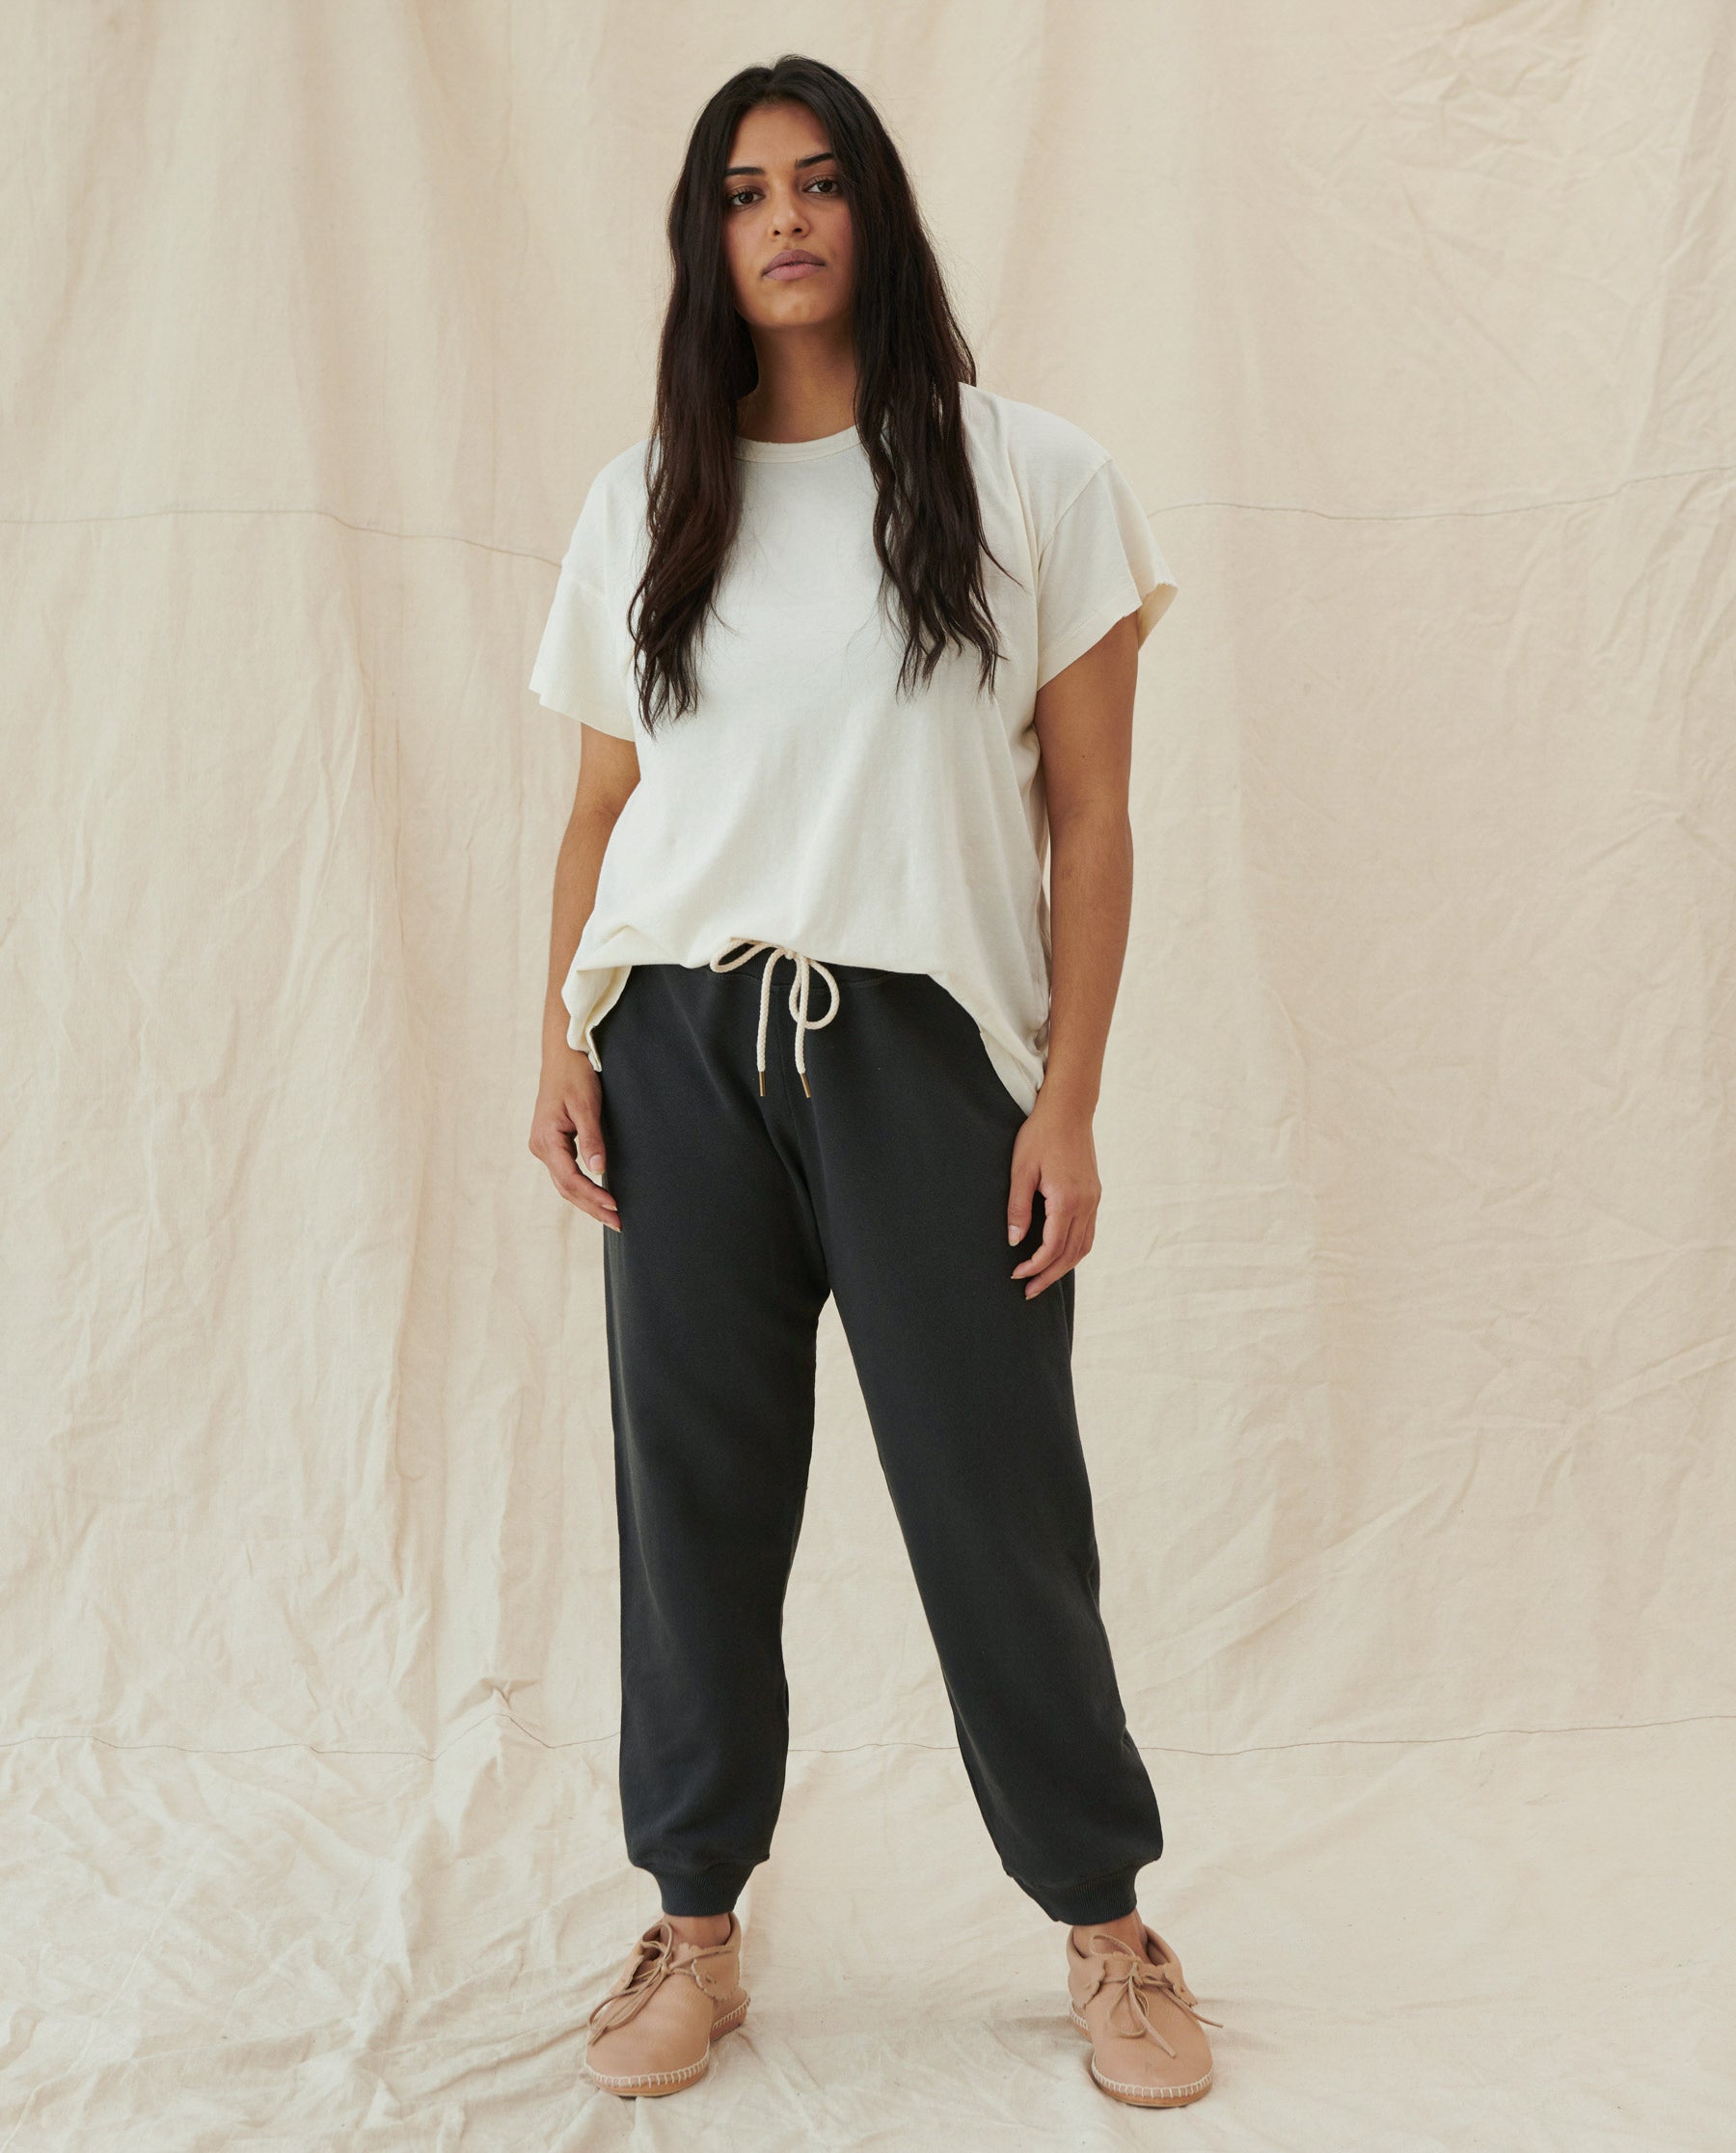 The Cropped Sweatpant. Solid -- Washed Black SWEATPANTS THE GREAT. CORE KNITS